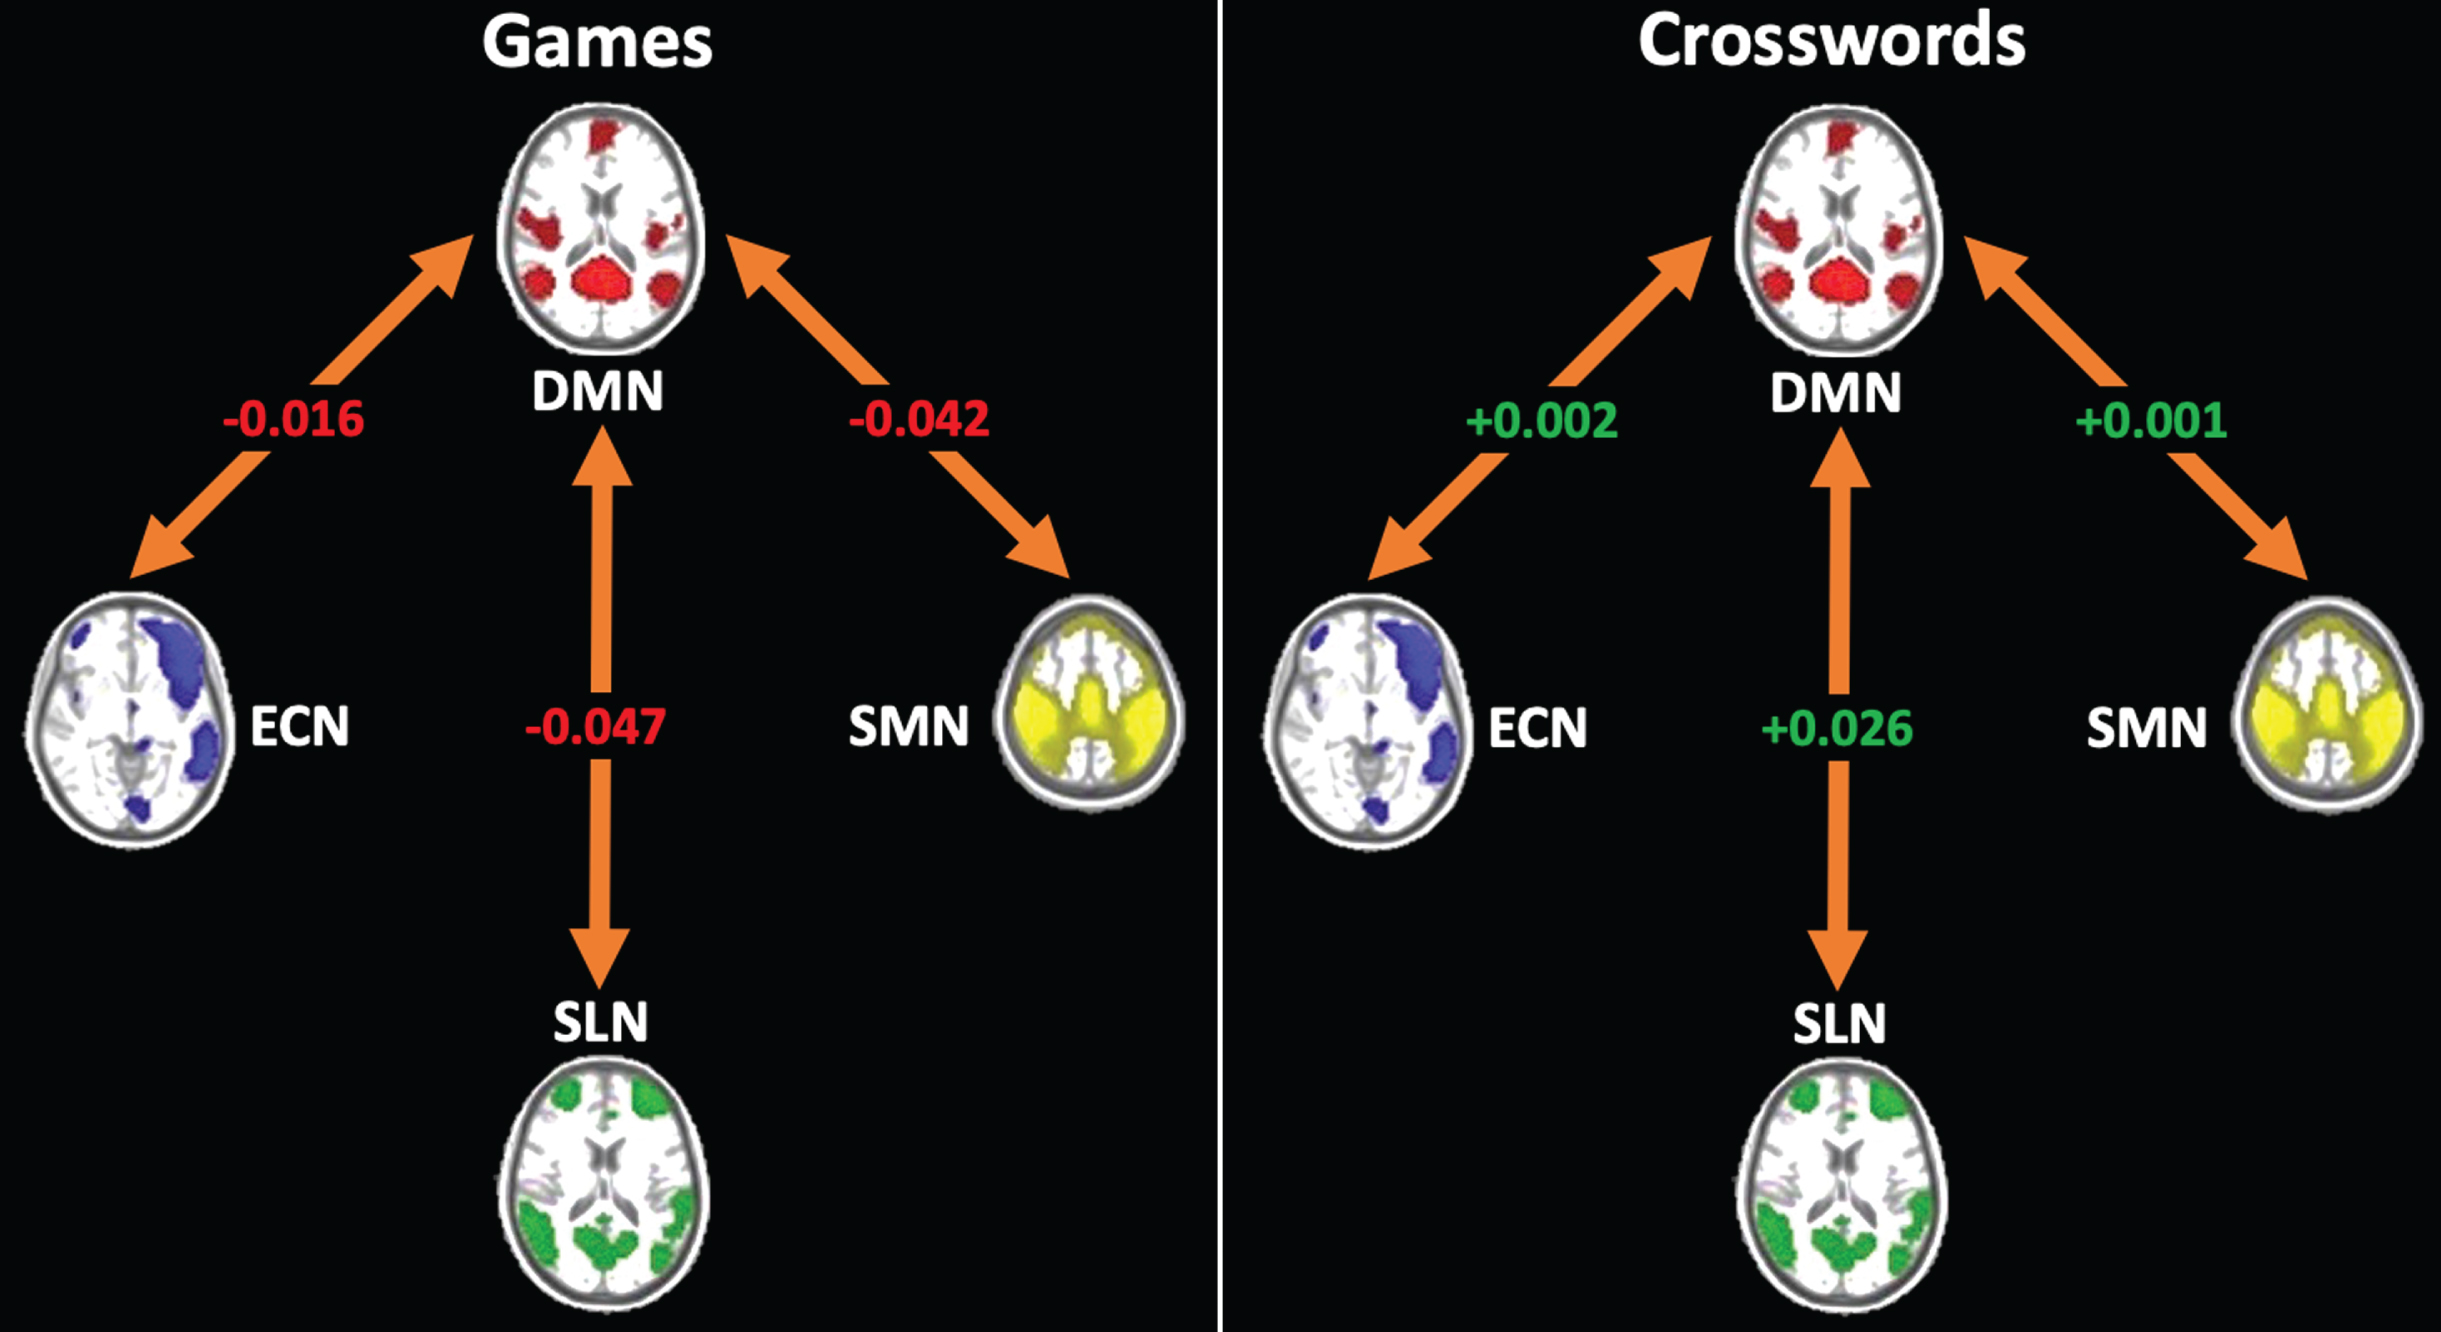 Between-network functional connectivity change from baseline to 78-weeks (78-weeks – baseline). The games group showed a decrease in connectivity between the DMN and all other networks (ECN, SLN, SMN), whereas the crosswords group showed increased connectivity between the DMN and these networks. Values in the figure are unadjusted for change in FD and baseline FC values. For adjusted values, see Table 3.